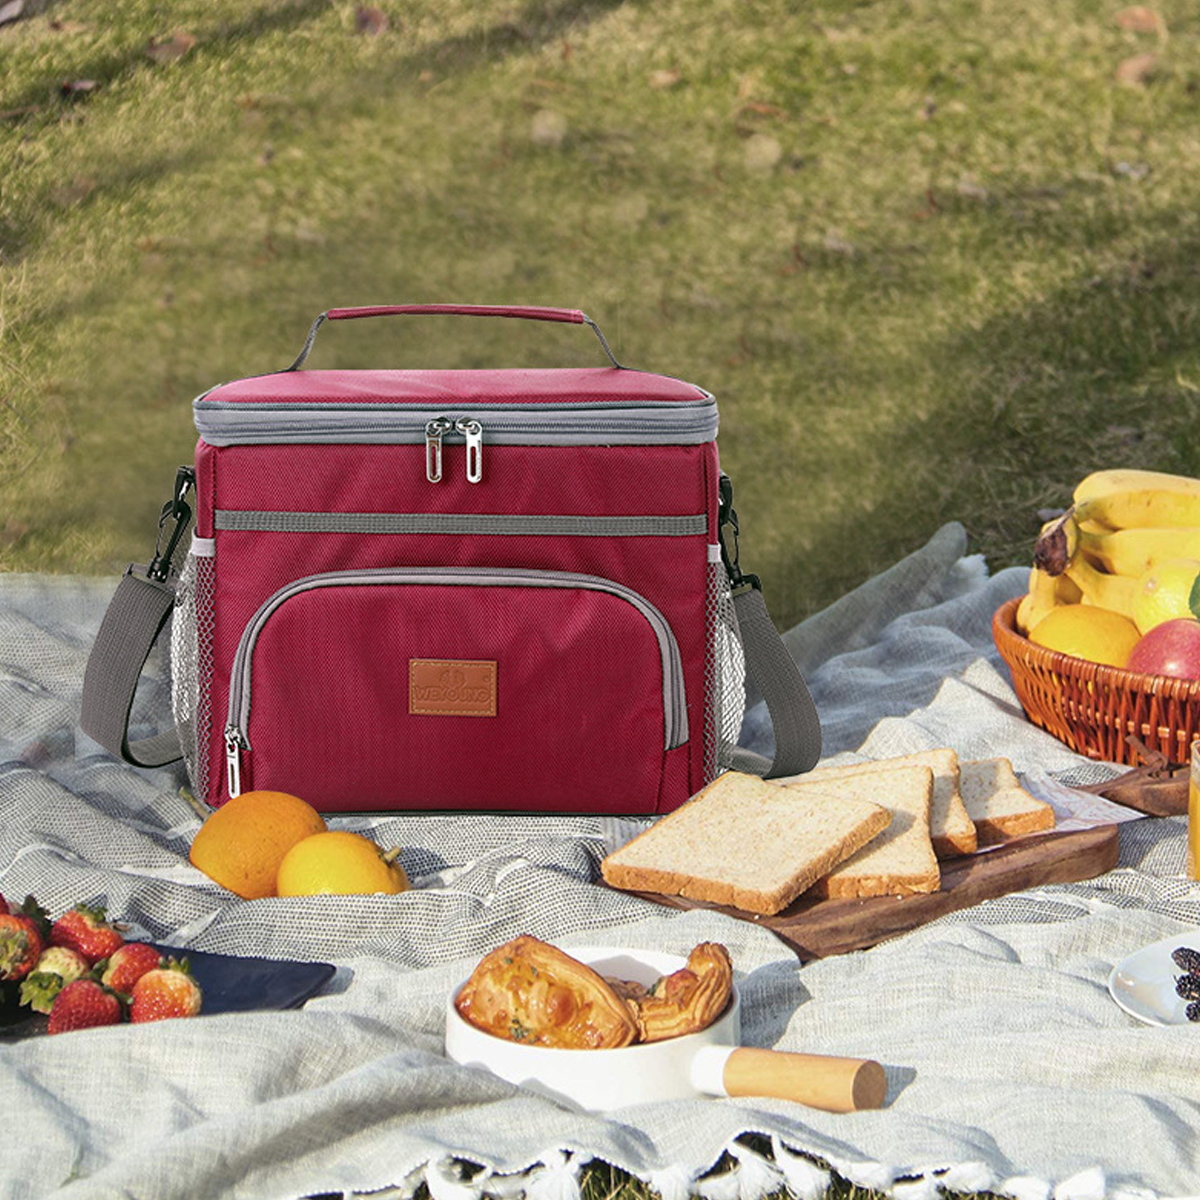 15L-Insulated-Picnic-Bag-Thermal-Food-Container-Handbag-Lunch-Bag-Outdoor-Camping-Travel-1872430-8